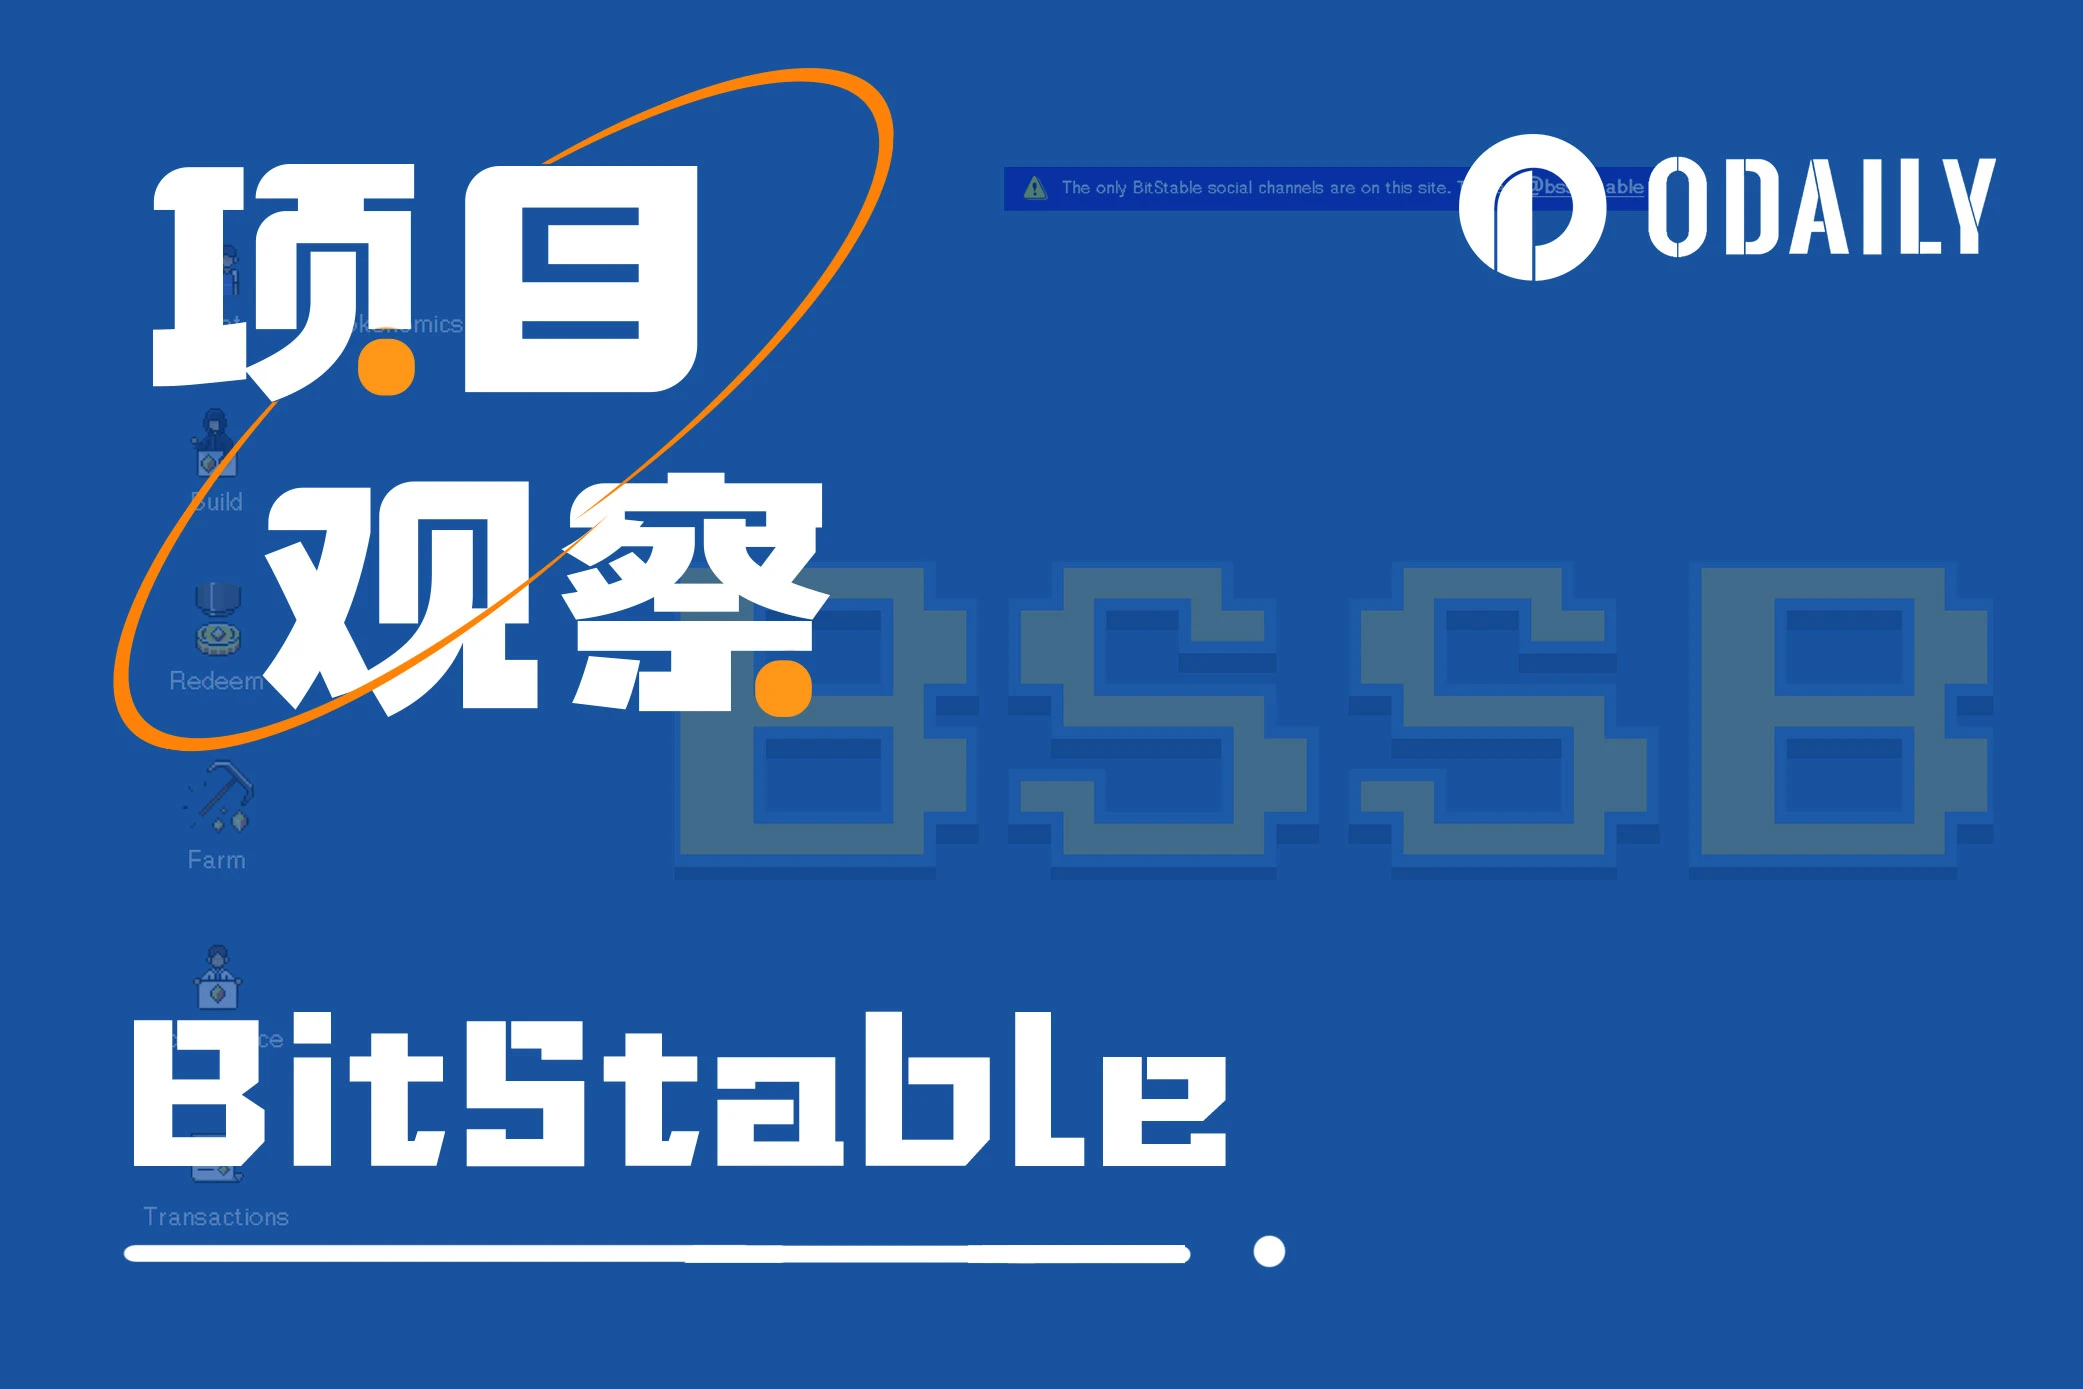 Learn about the BitStable project features and public sale process in one article